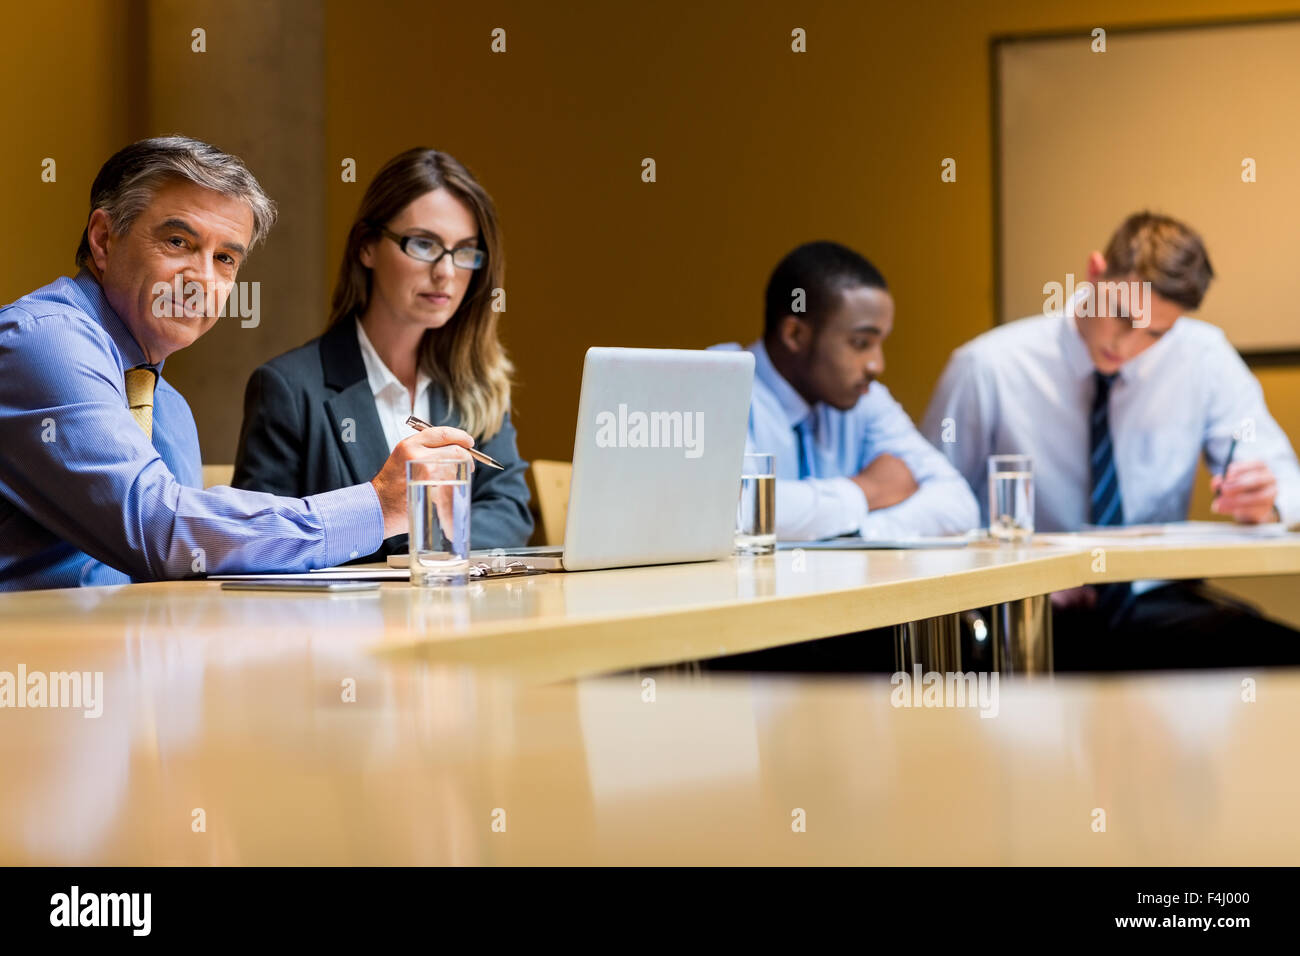 Business people working together during meeting Stock Photo